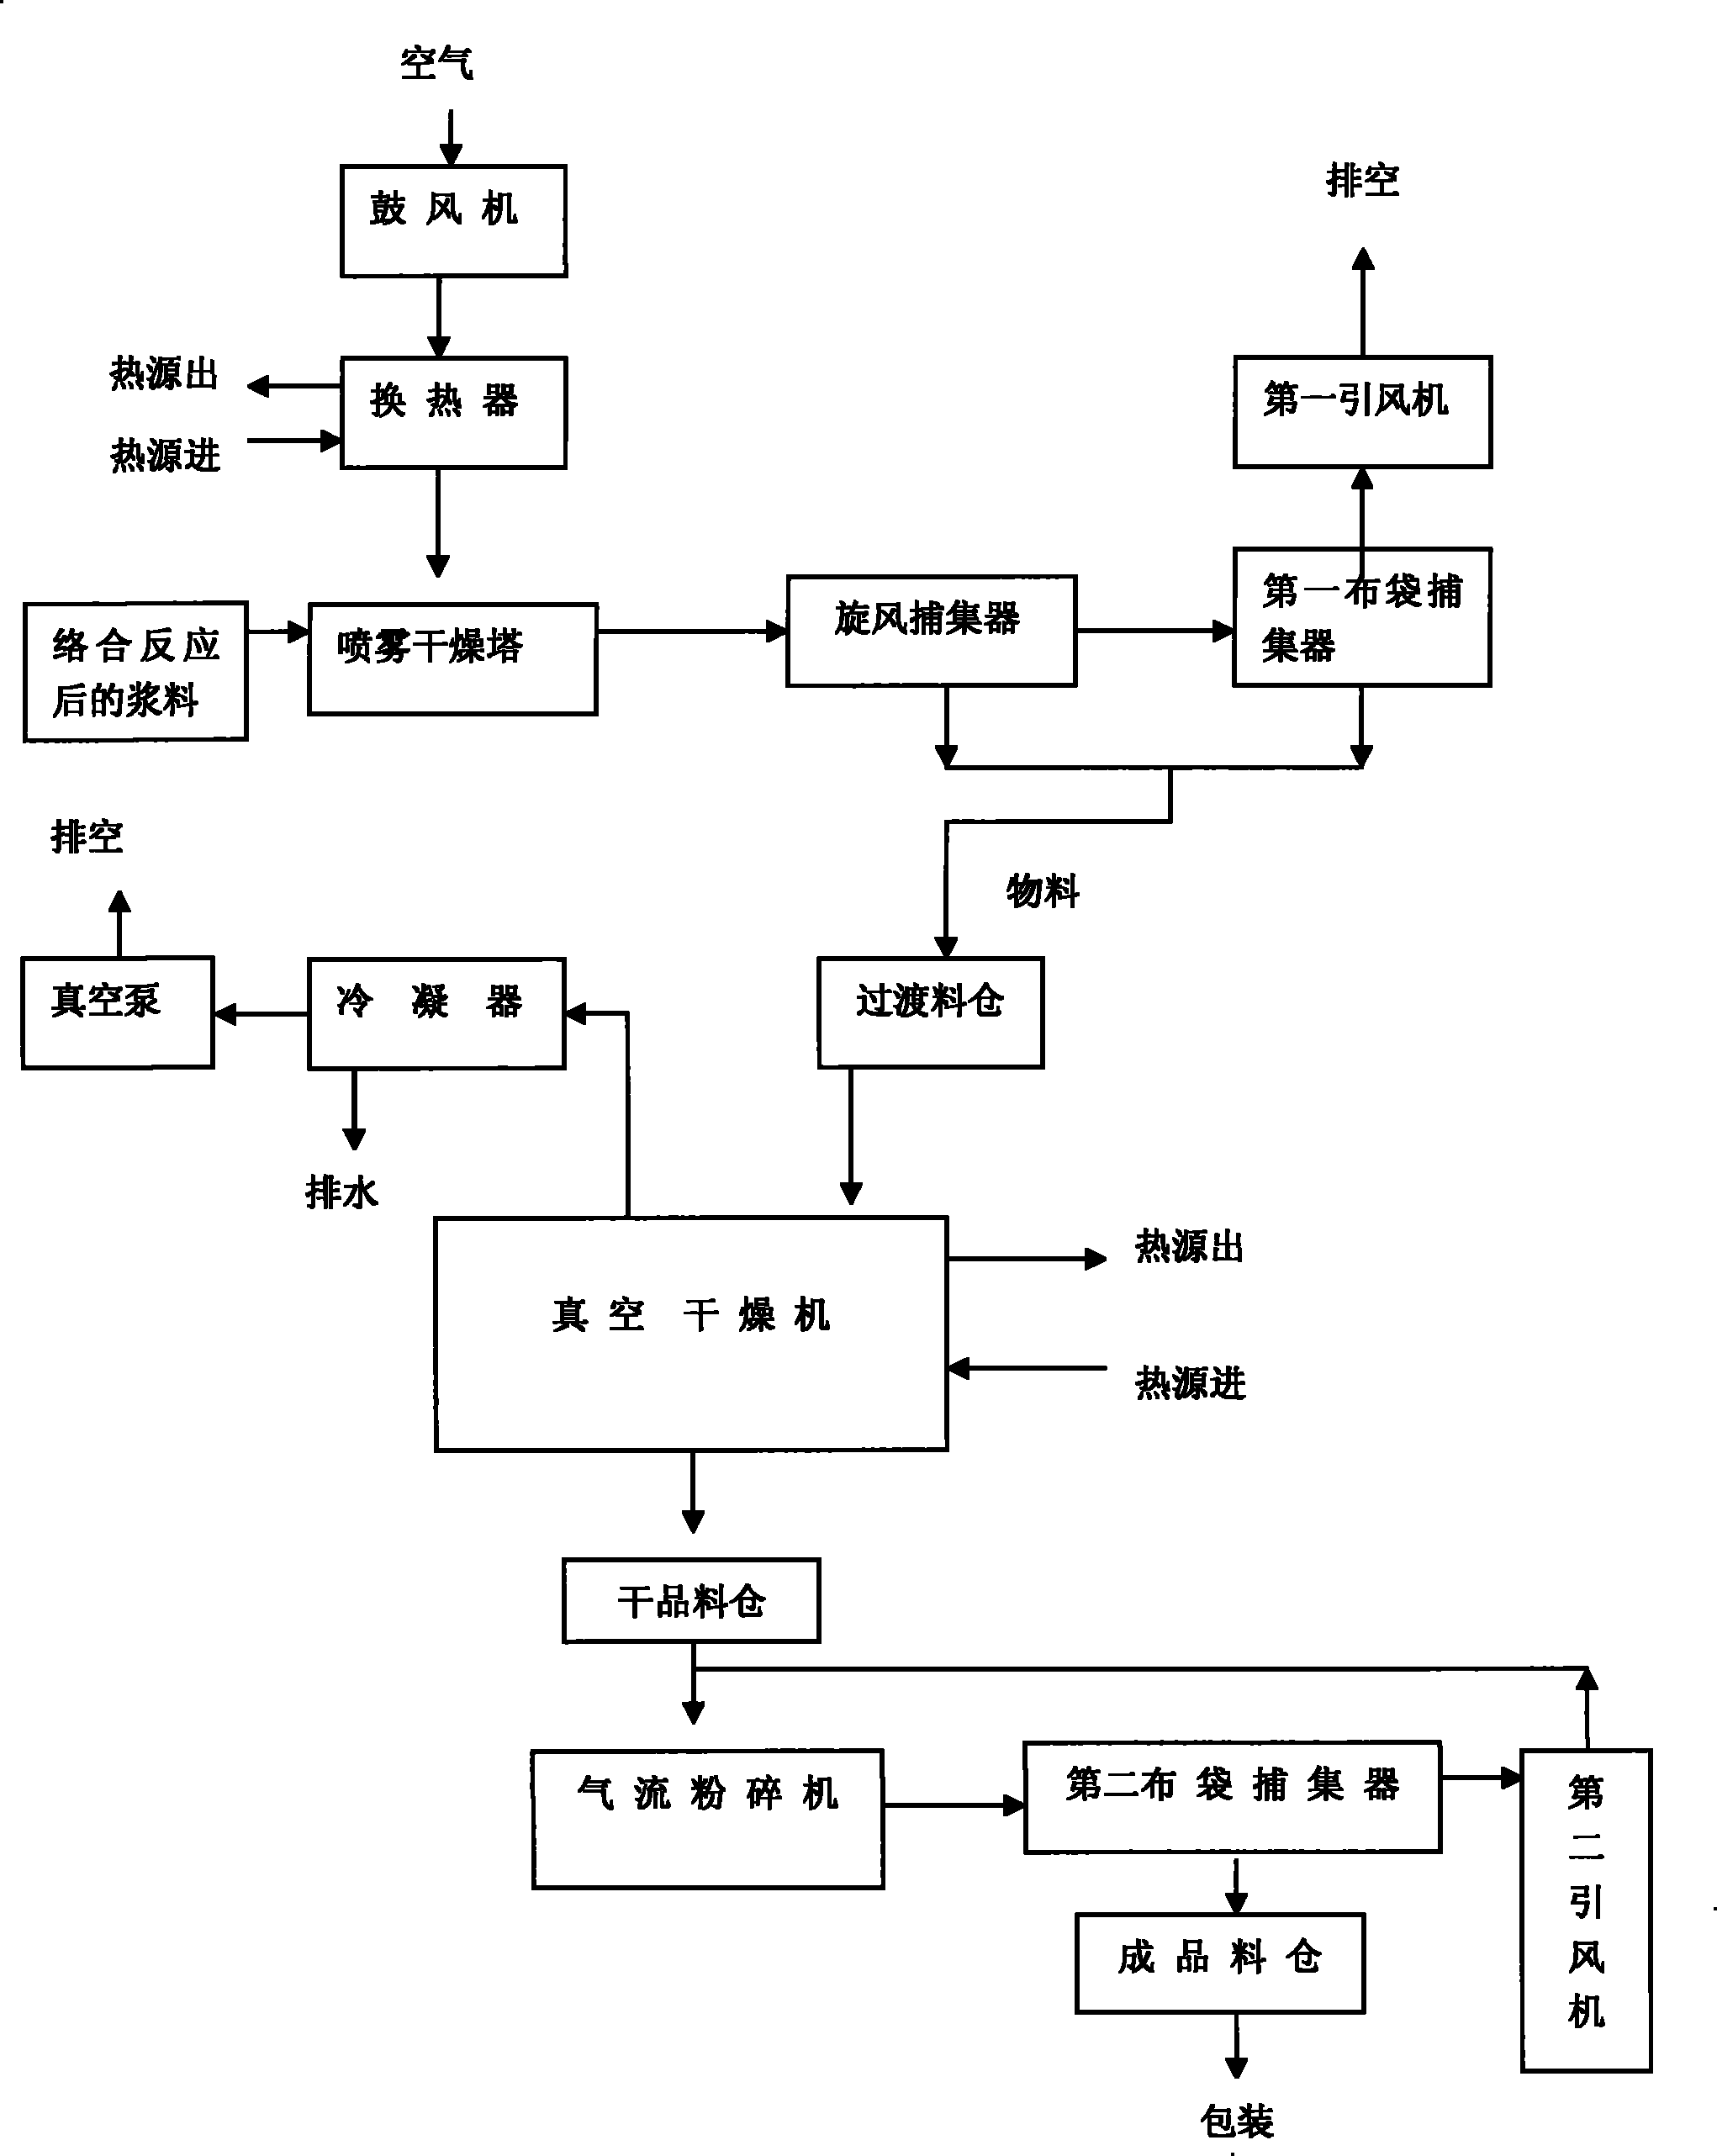 Method and device for drying complex mancozeb